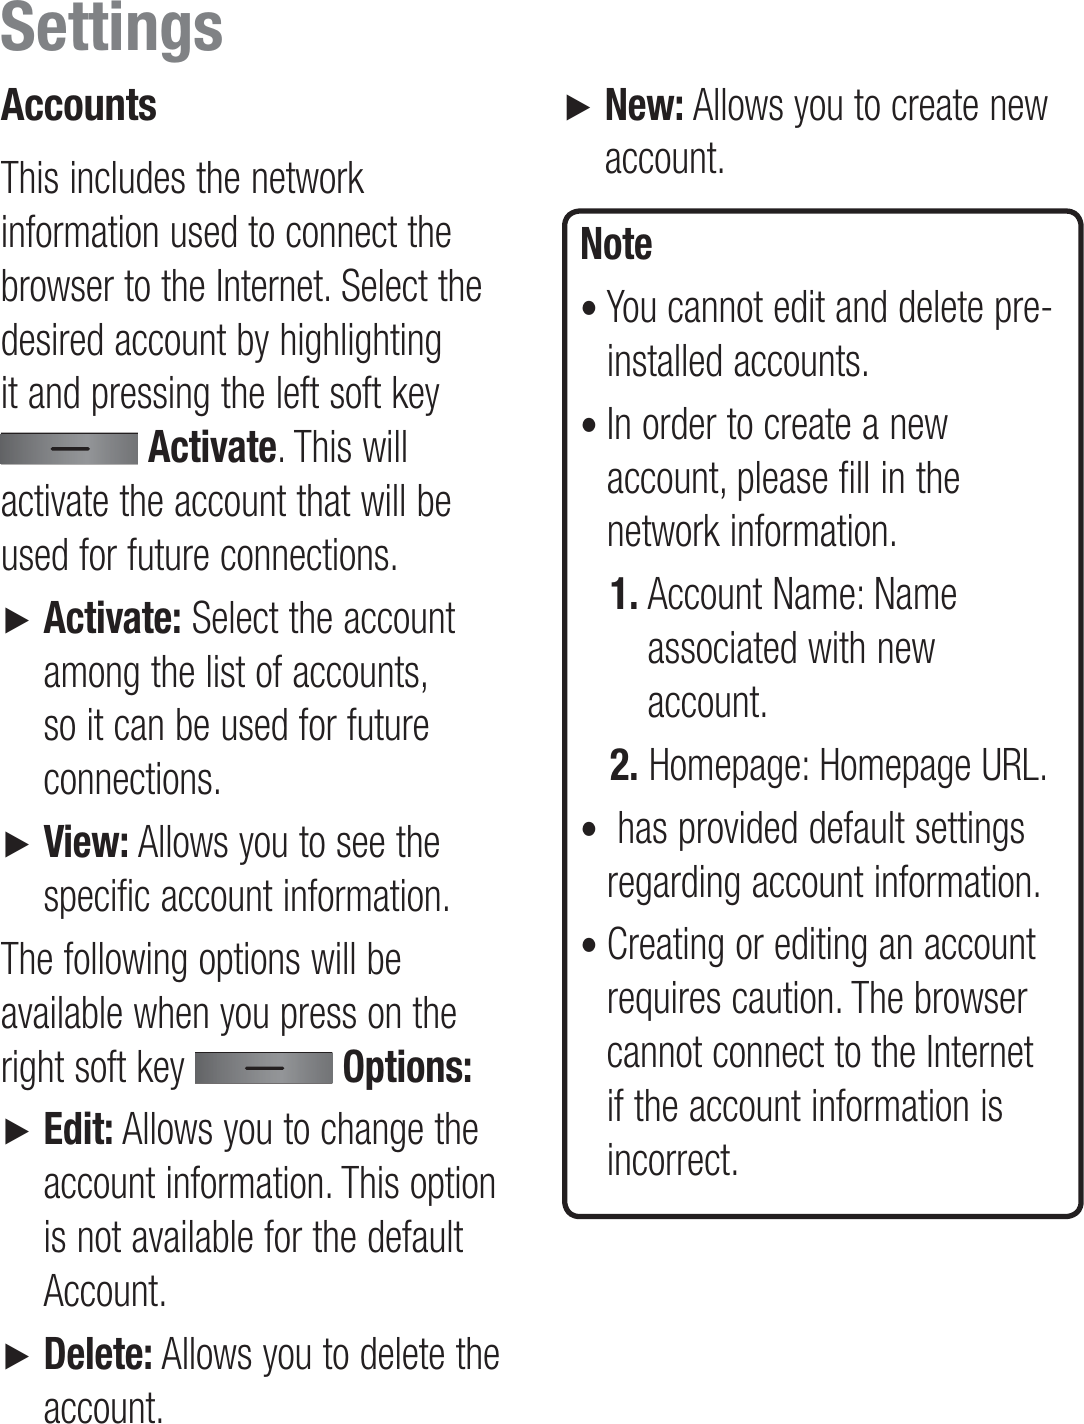 AccountsThis includes the network information used to connect the browser to the Internet. Select the desired account by highlighting it and pressing the left soft key  Activate. This will activate the account that will be used for future connections. ►    Activate: Select the account among the list of accounts, so it can be used for future connections.►    View: Allows you to see the specific account information.The following options will be available when you press on the right soft key   Options:►     Edit: Allows you to change the account information. This option is not available for the default Account.►    Delete: Allows you to delete the account.►    New: Allows you to create new account.Note•  You cannot edit and delete pre-installed accounts. •  In order to create a new account, please fill in the network information.1.  Account Name: Name associated with new account.2.  Homepage: Homepage URL.•   has provided default settings regarding account information.•  Creating or editing an account requires caution. The browser cannot connect to the Internet if the account information is incorrect.Settings